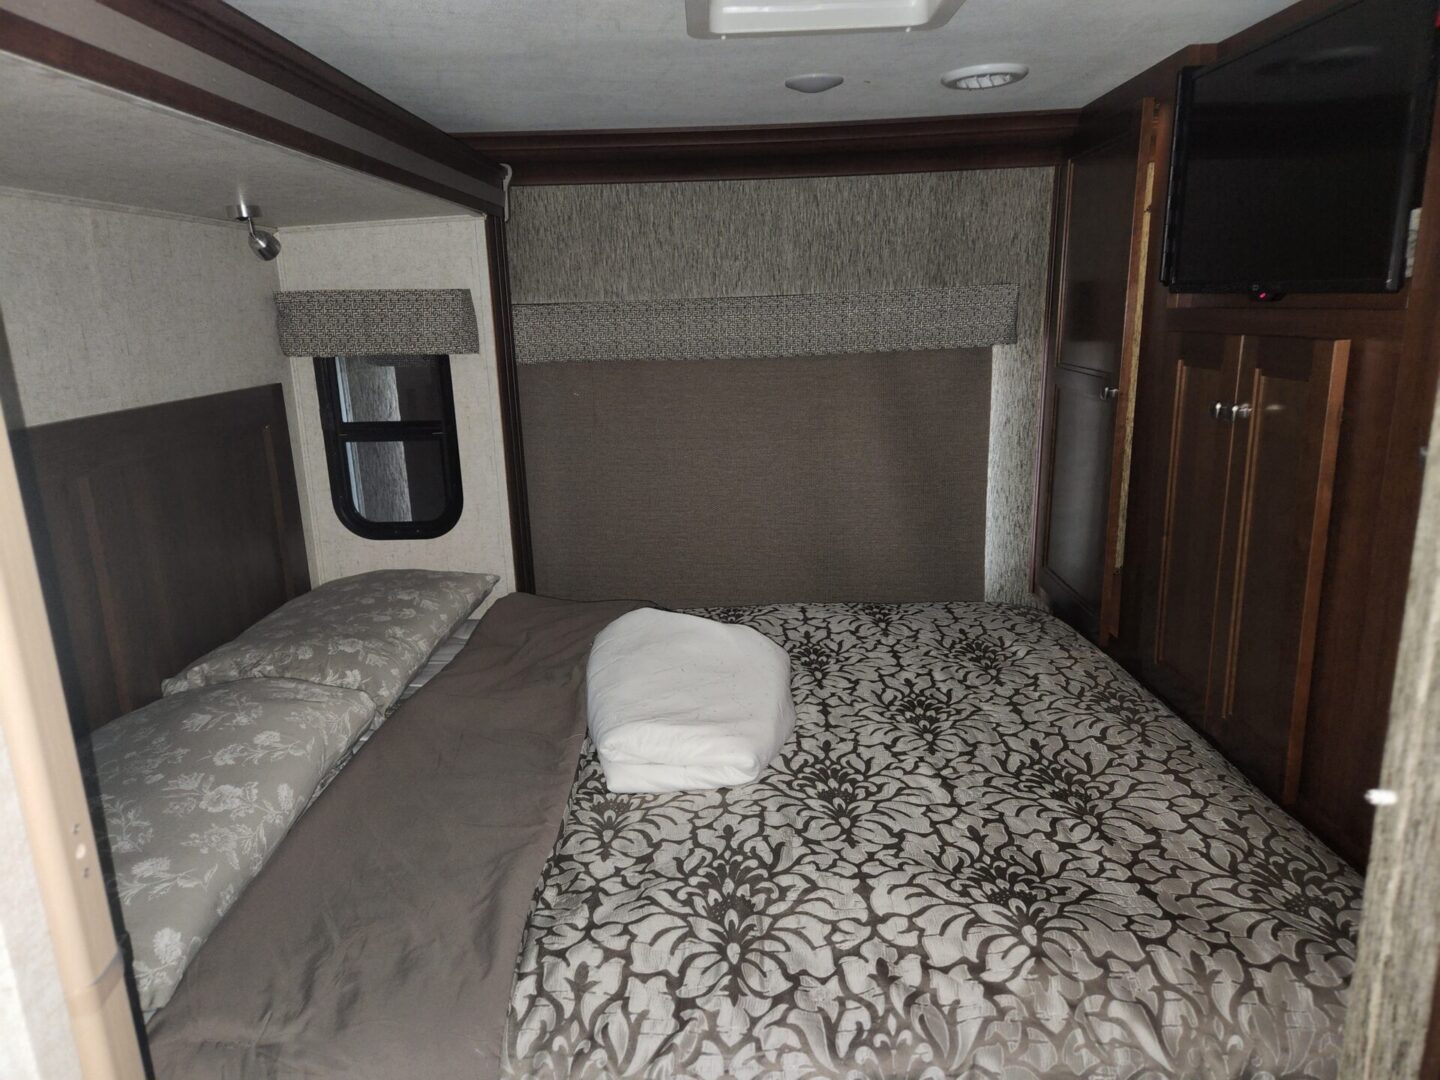 A bed room with two beds and a tv